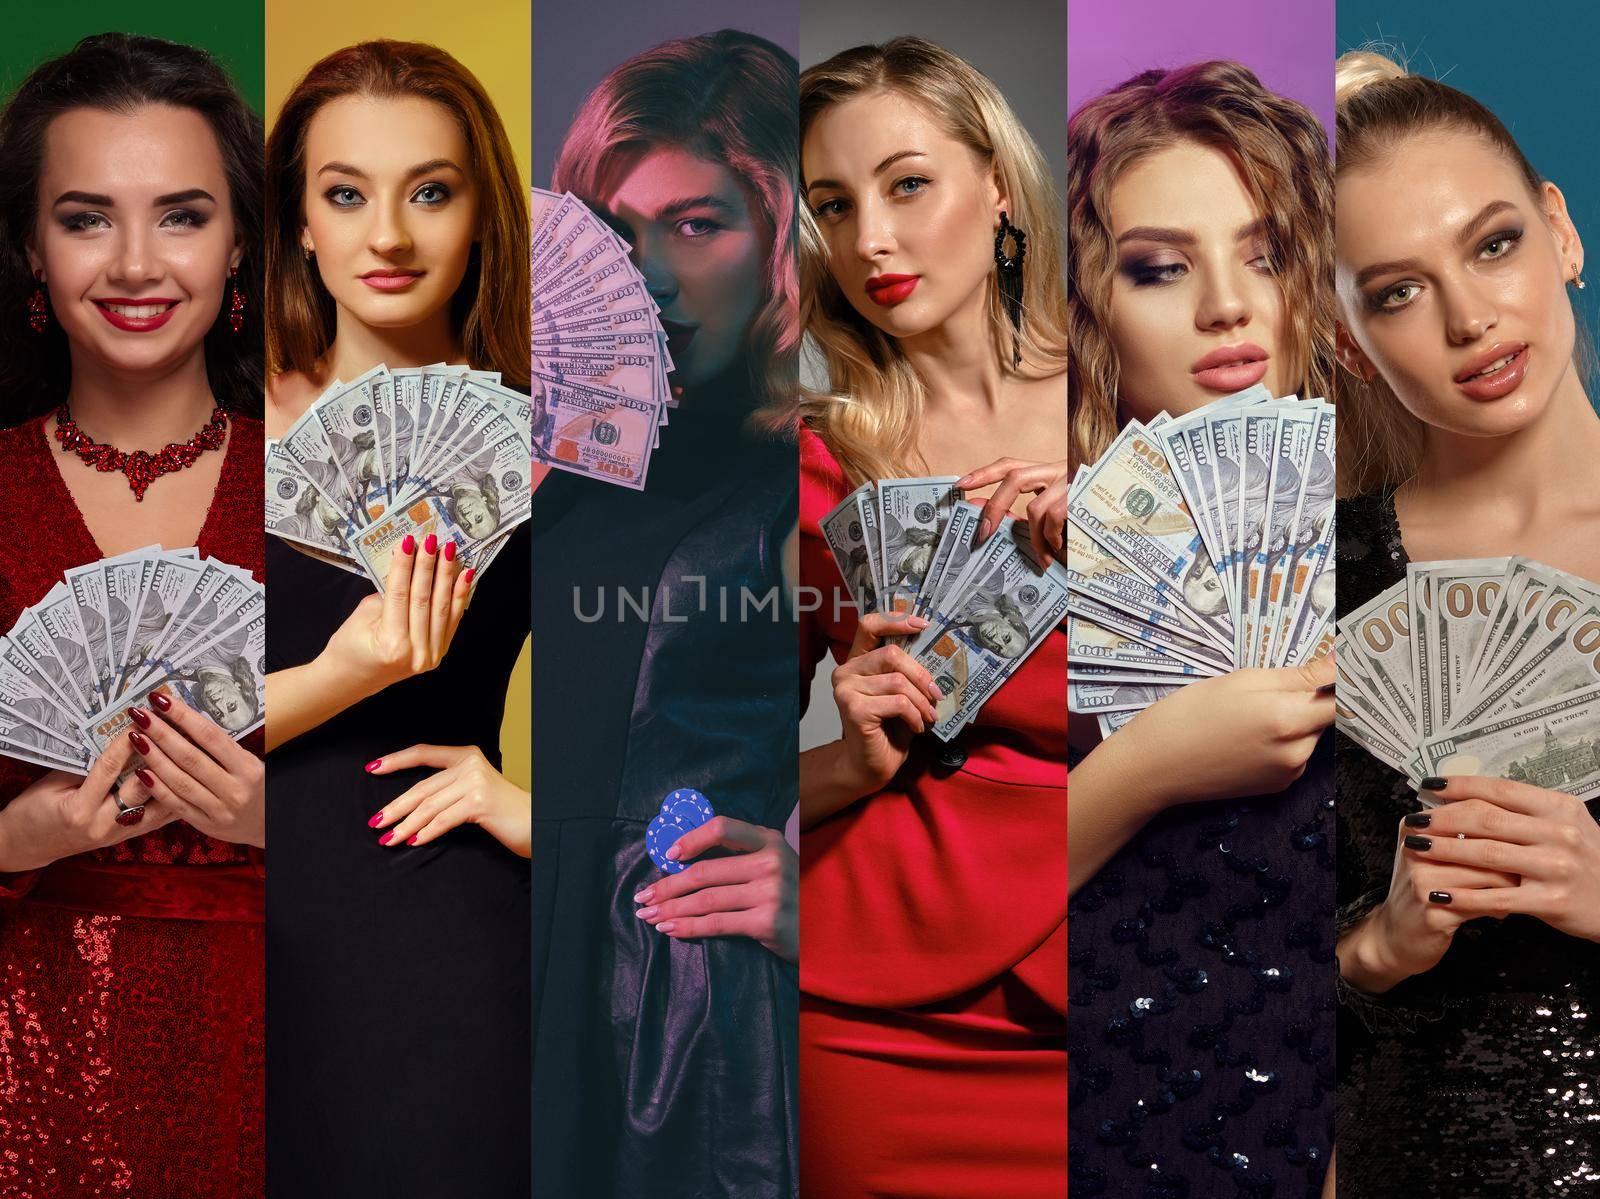 Collage of attractive women with bright make-up, in stylish dresses and jewelry. Smiling, showing fans of hundred dollar bills and blue chips, posing on colorful backgrounds. Poker, casino. Close-up